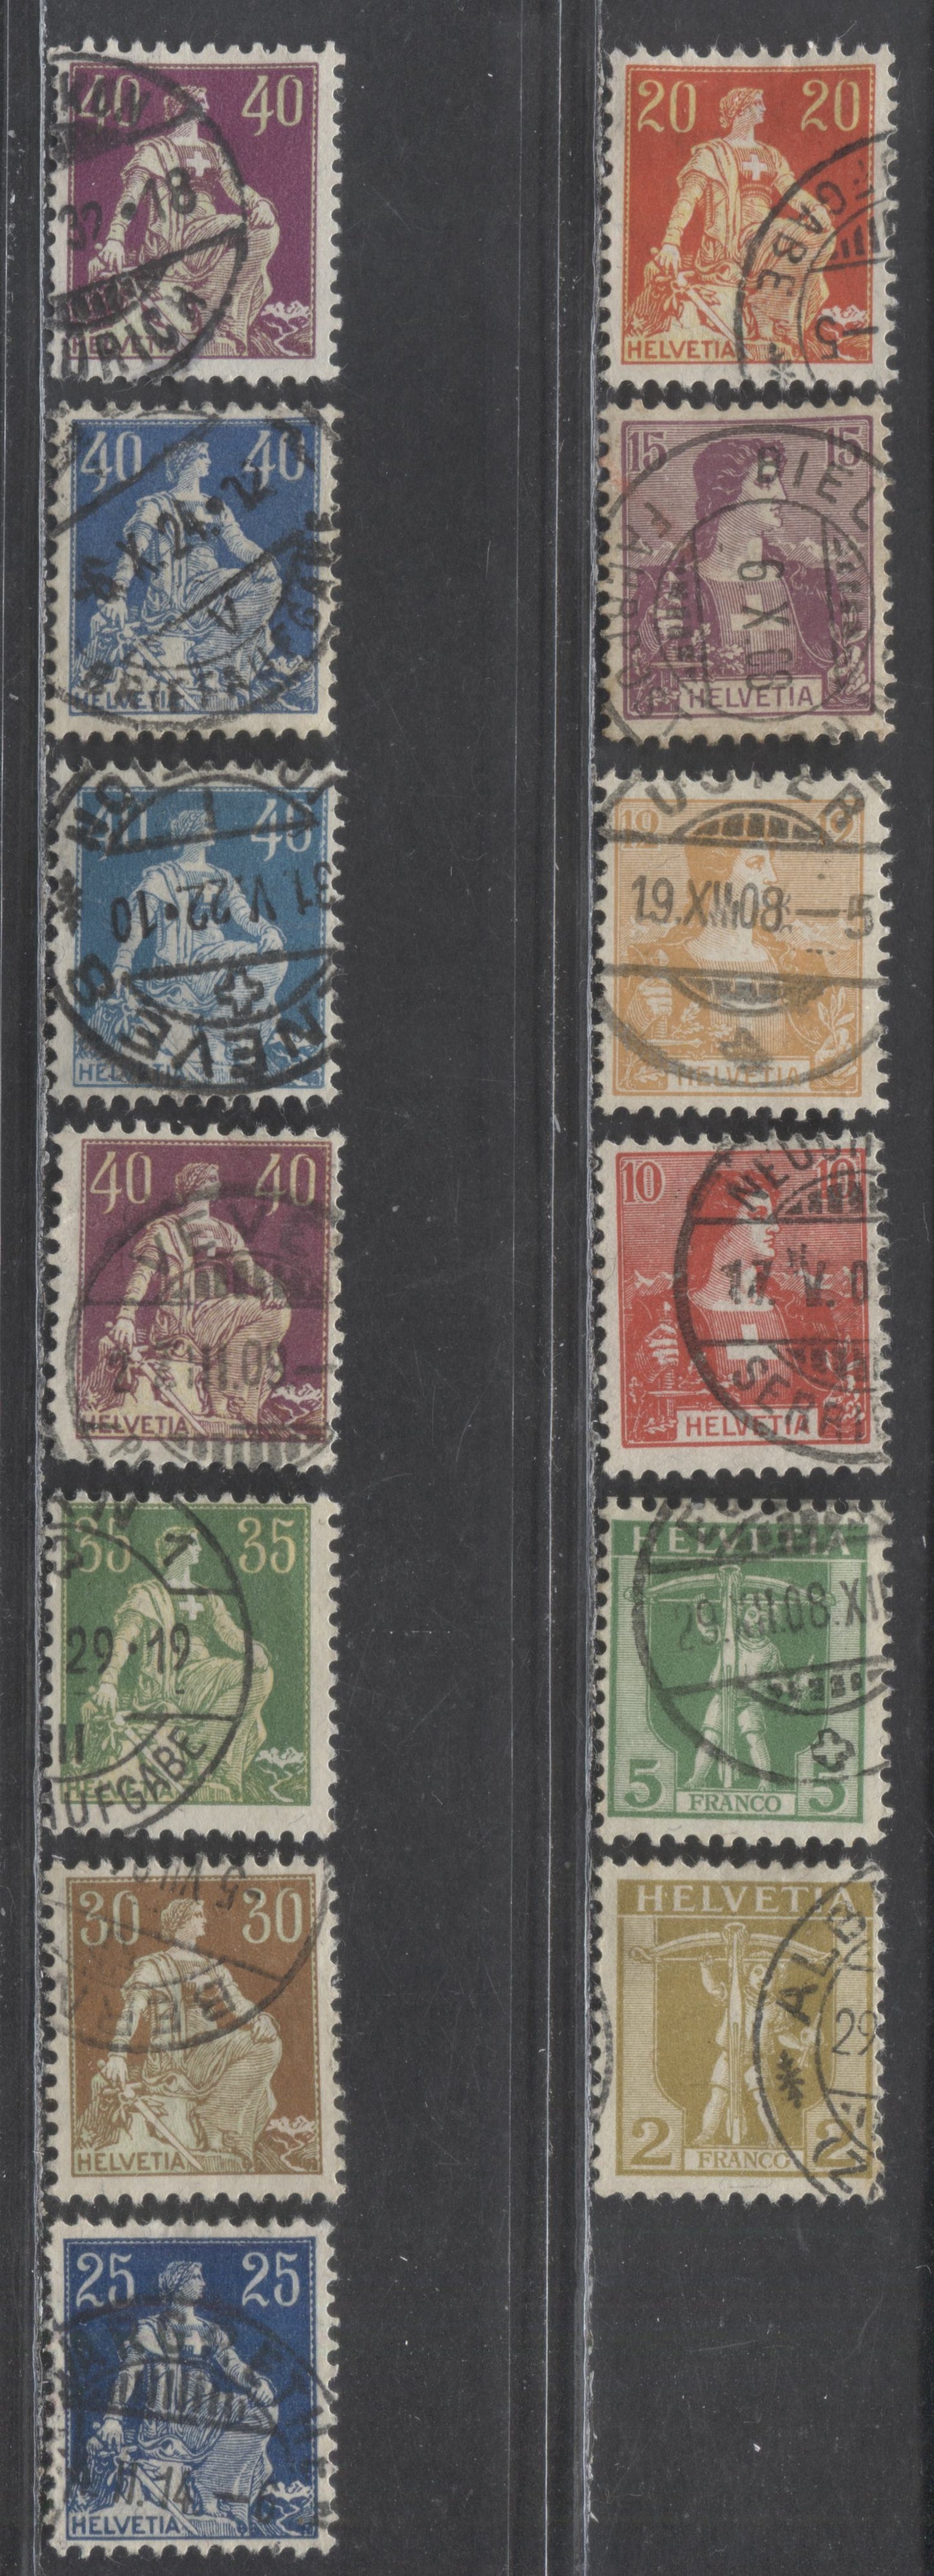 Lot 284 Switzerland SC#126/138 1907-1925 Helvetia & William Tell's Son Issues, 13 Very Fine Used Singles, Click on Listing to See ALL Pictures, 2022 Scott Classic Cat. $50.3 USD